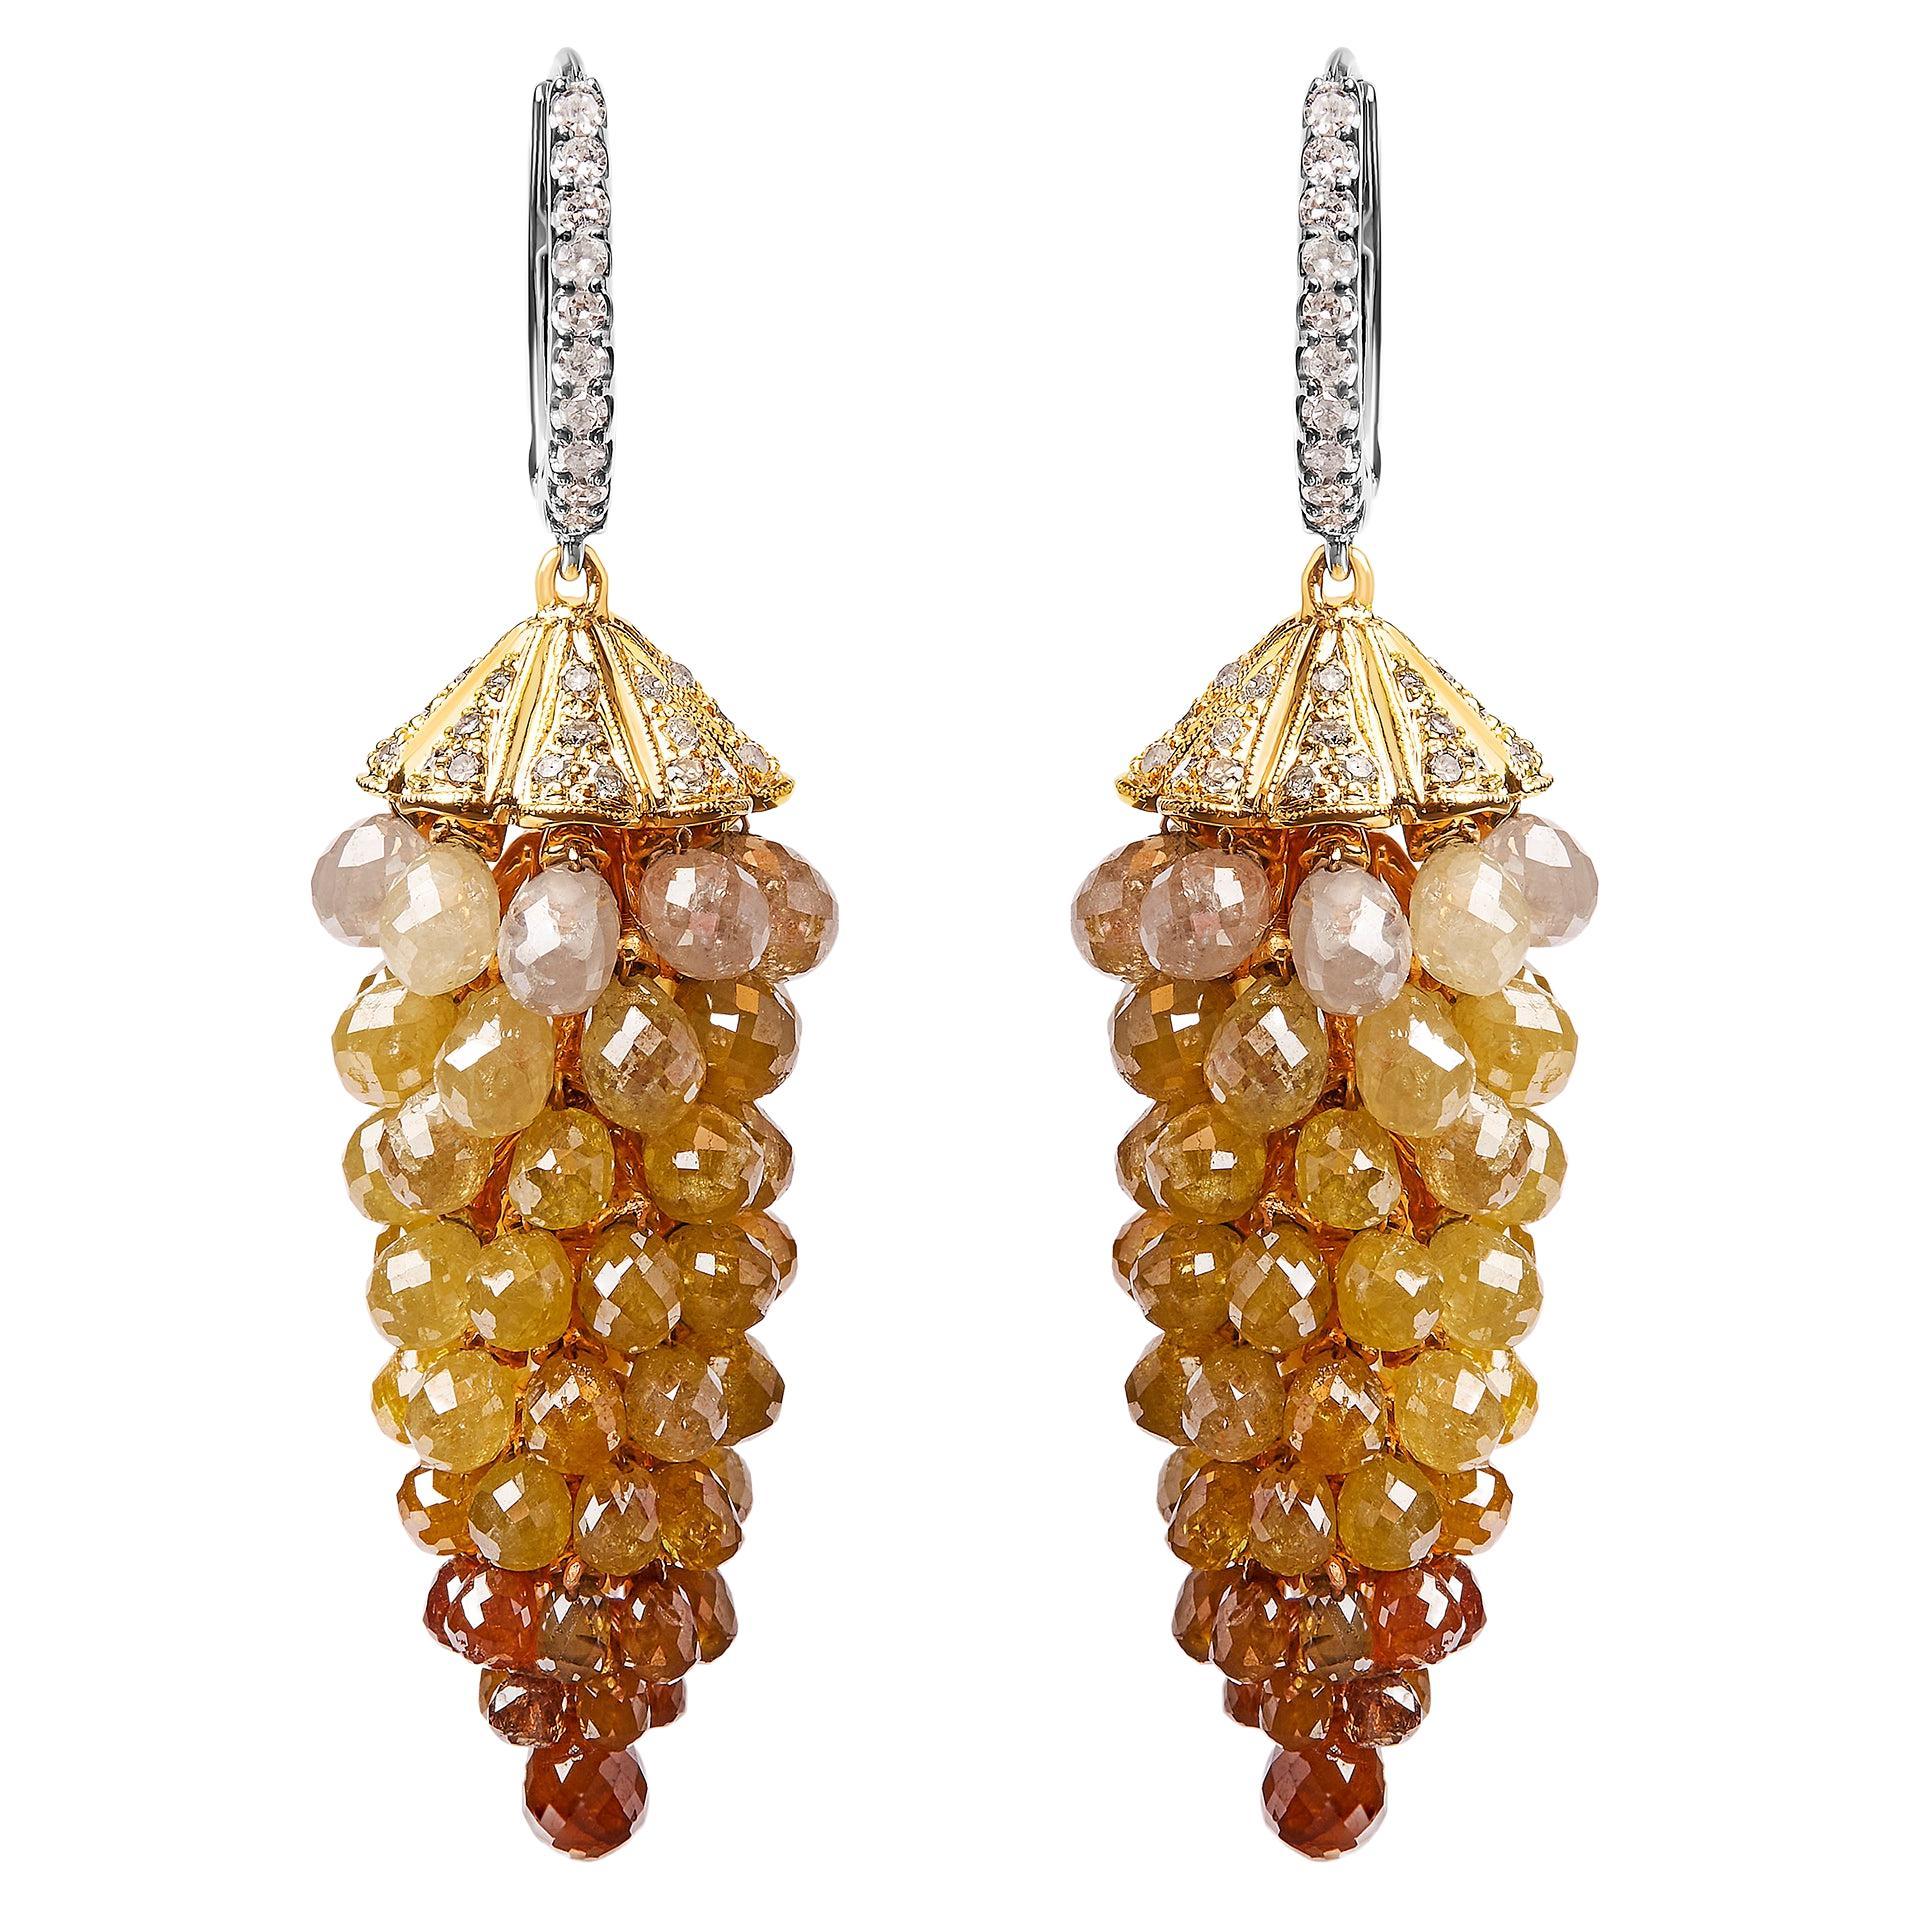 14K White and Yellow Gold 38.0 Carat Diamond Honeycomb Drop and Dangle Earring